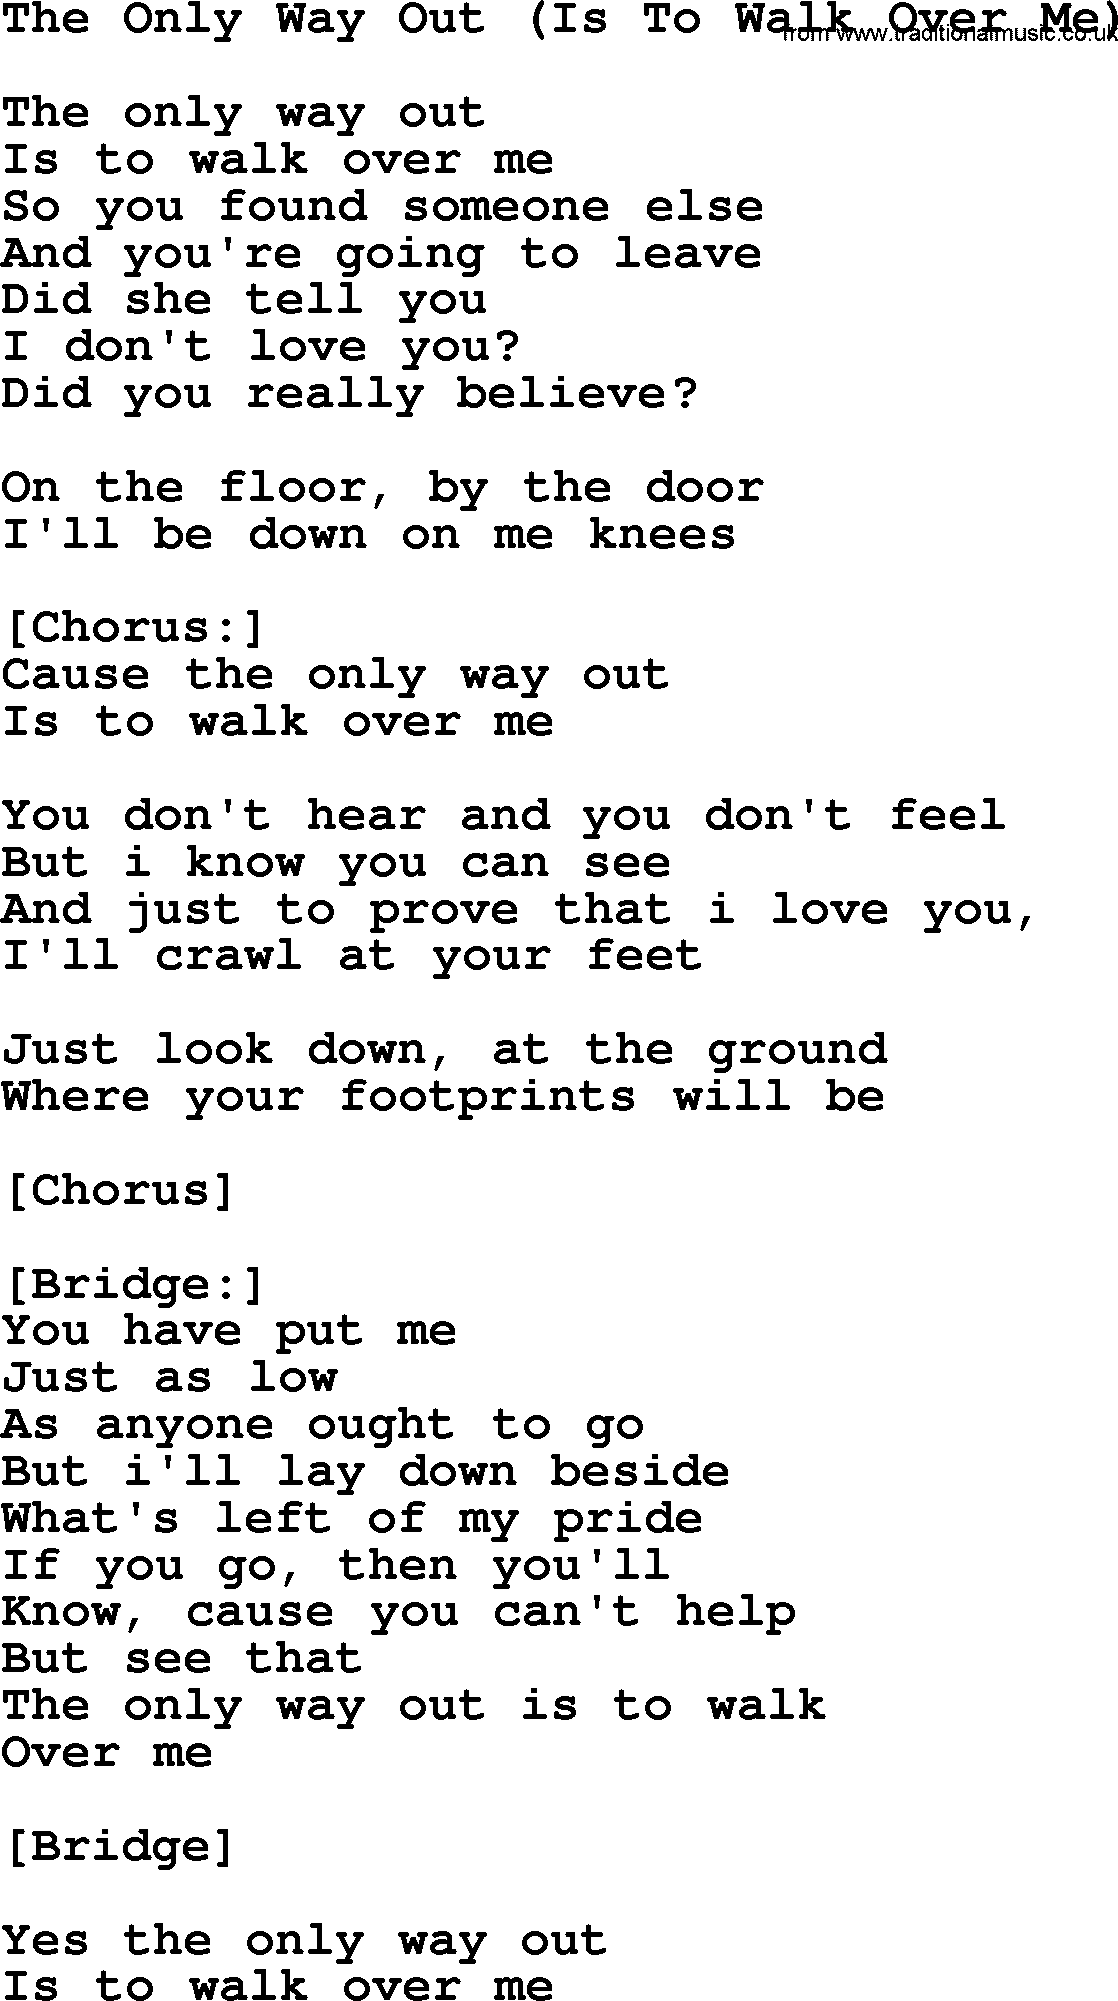 Dolly Parton song The Only Way Out (Is To Walk Over Me).txt lyrics